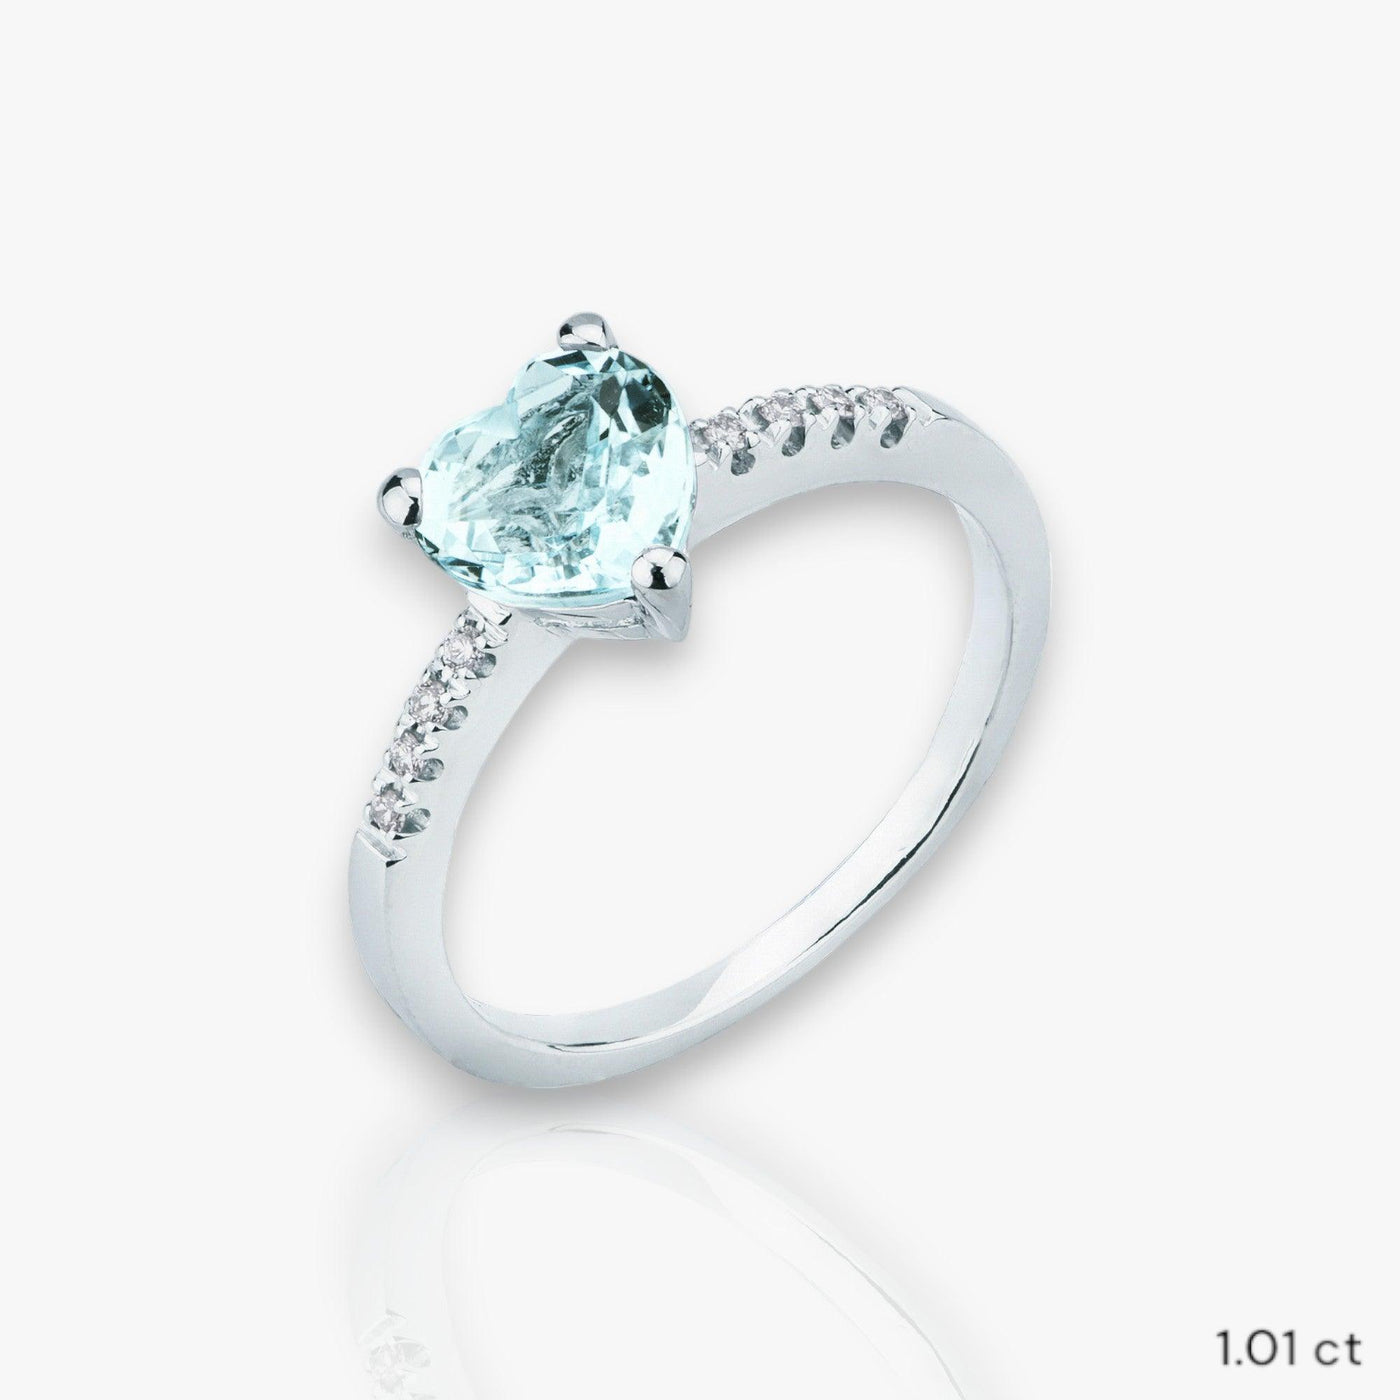 Aquamarine Heart Ring with ascent diamonds in 3 sizes - Moregola Fine Jewelry